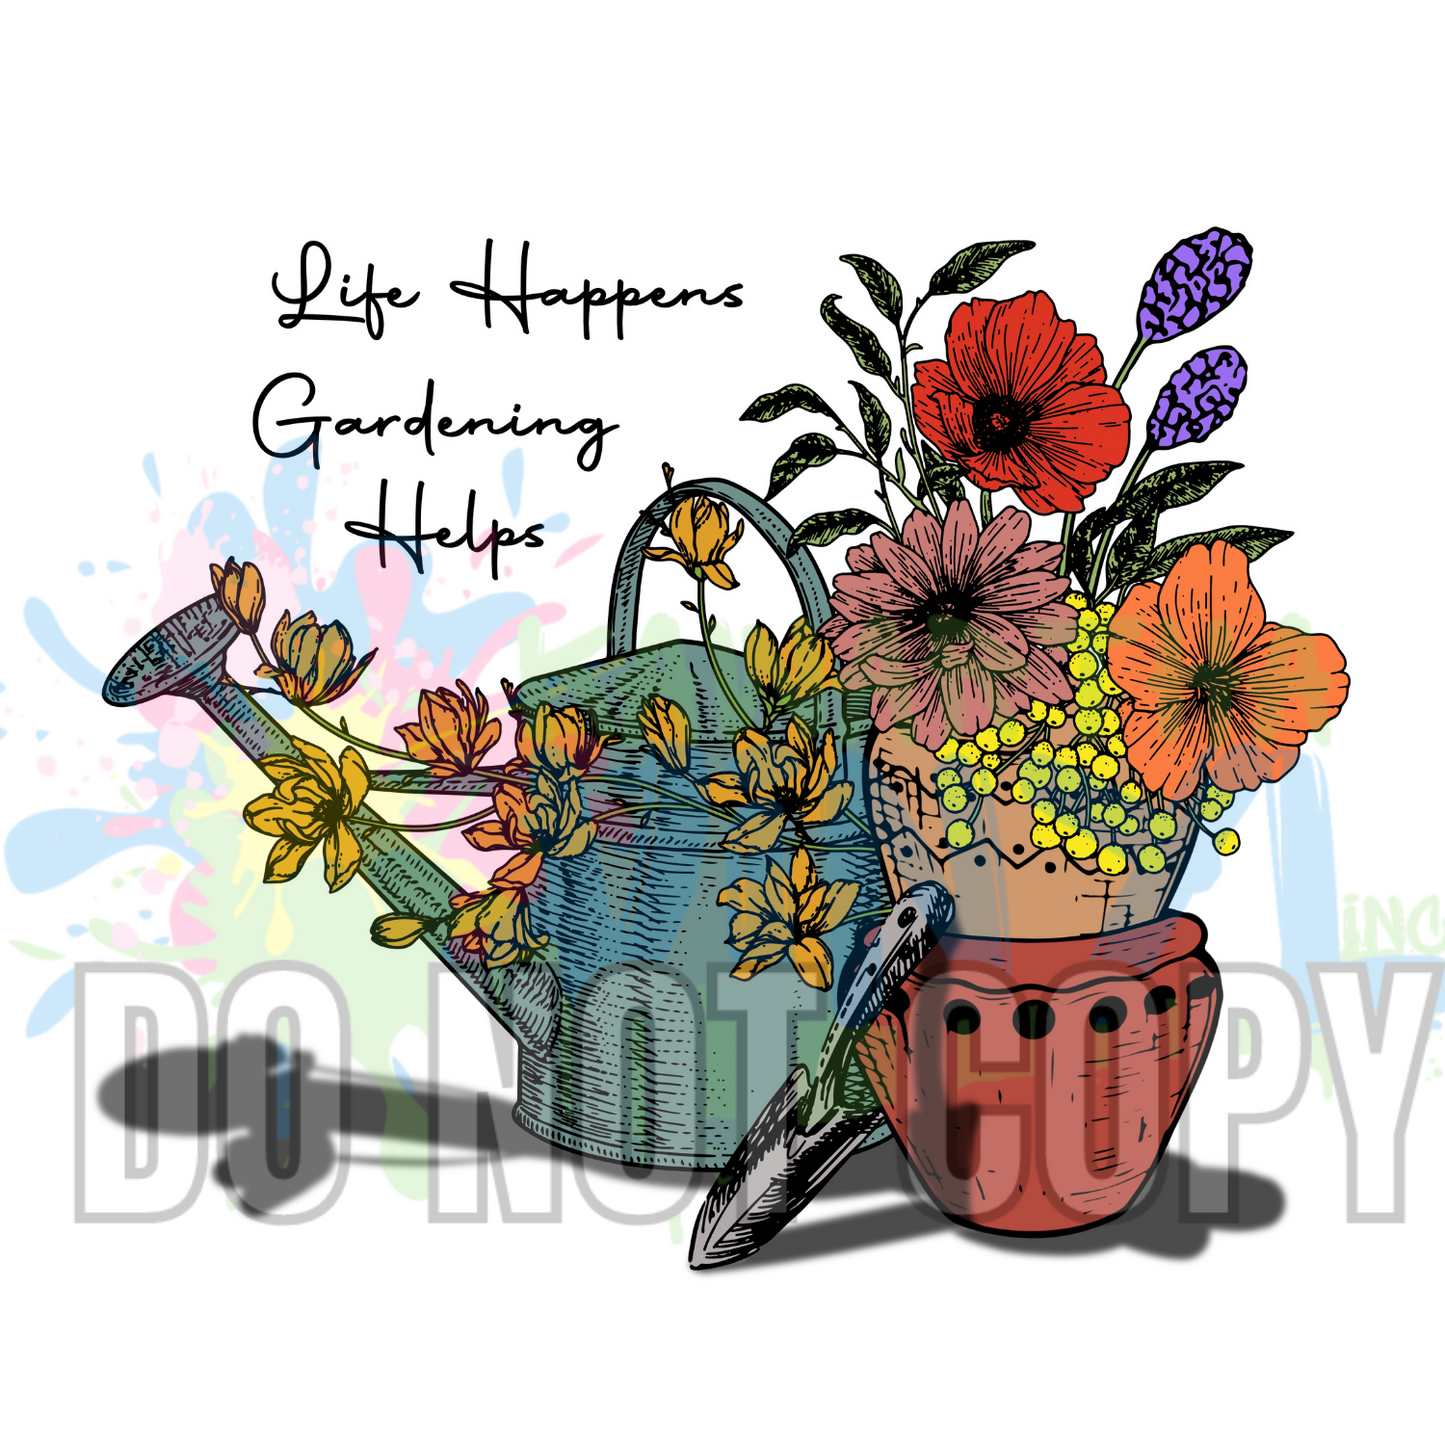 Life Happens Gardening Helps Sublimation Print